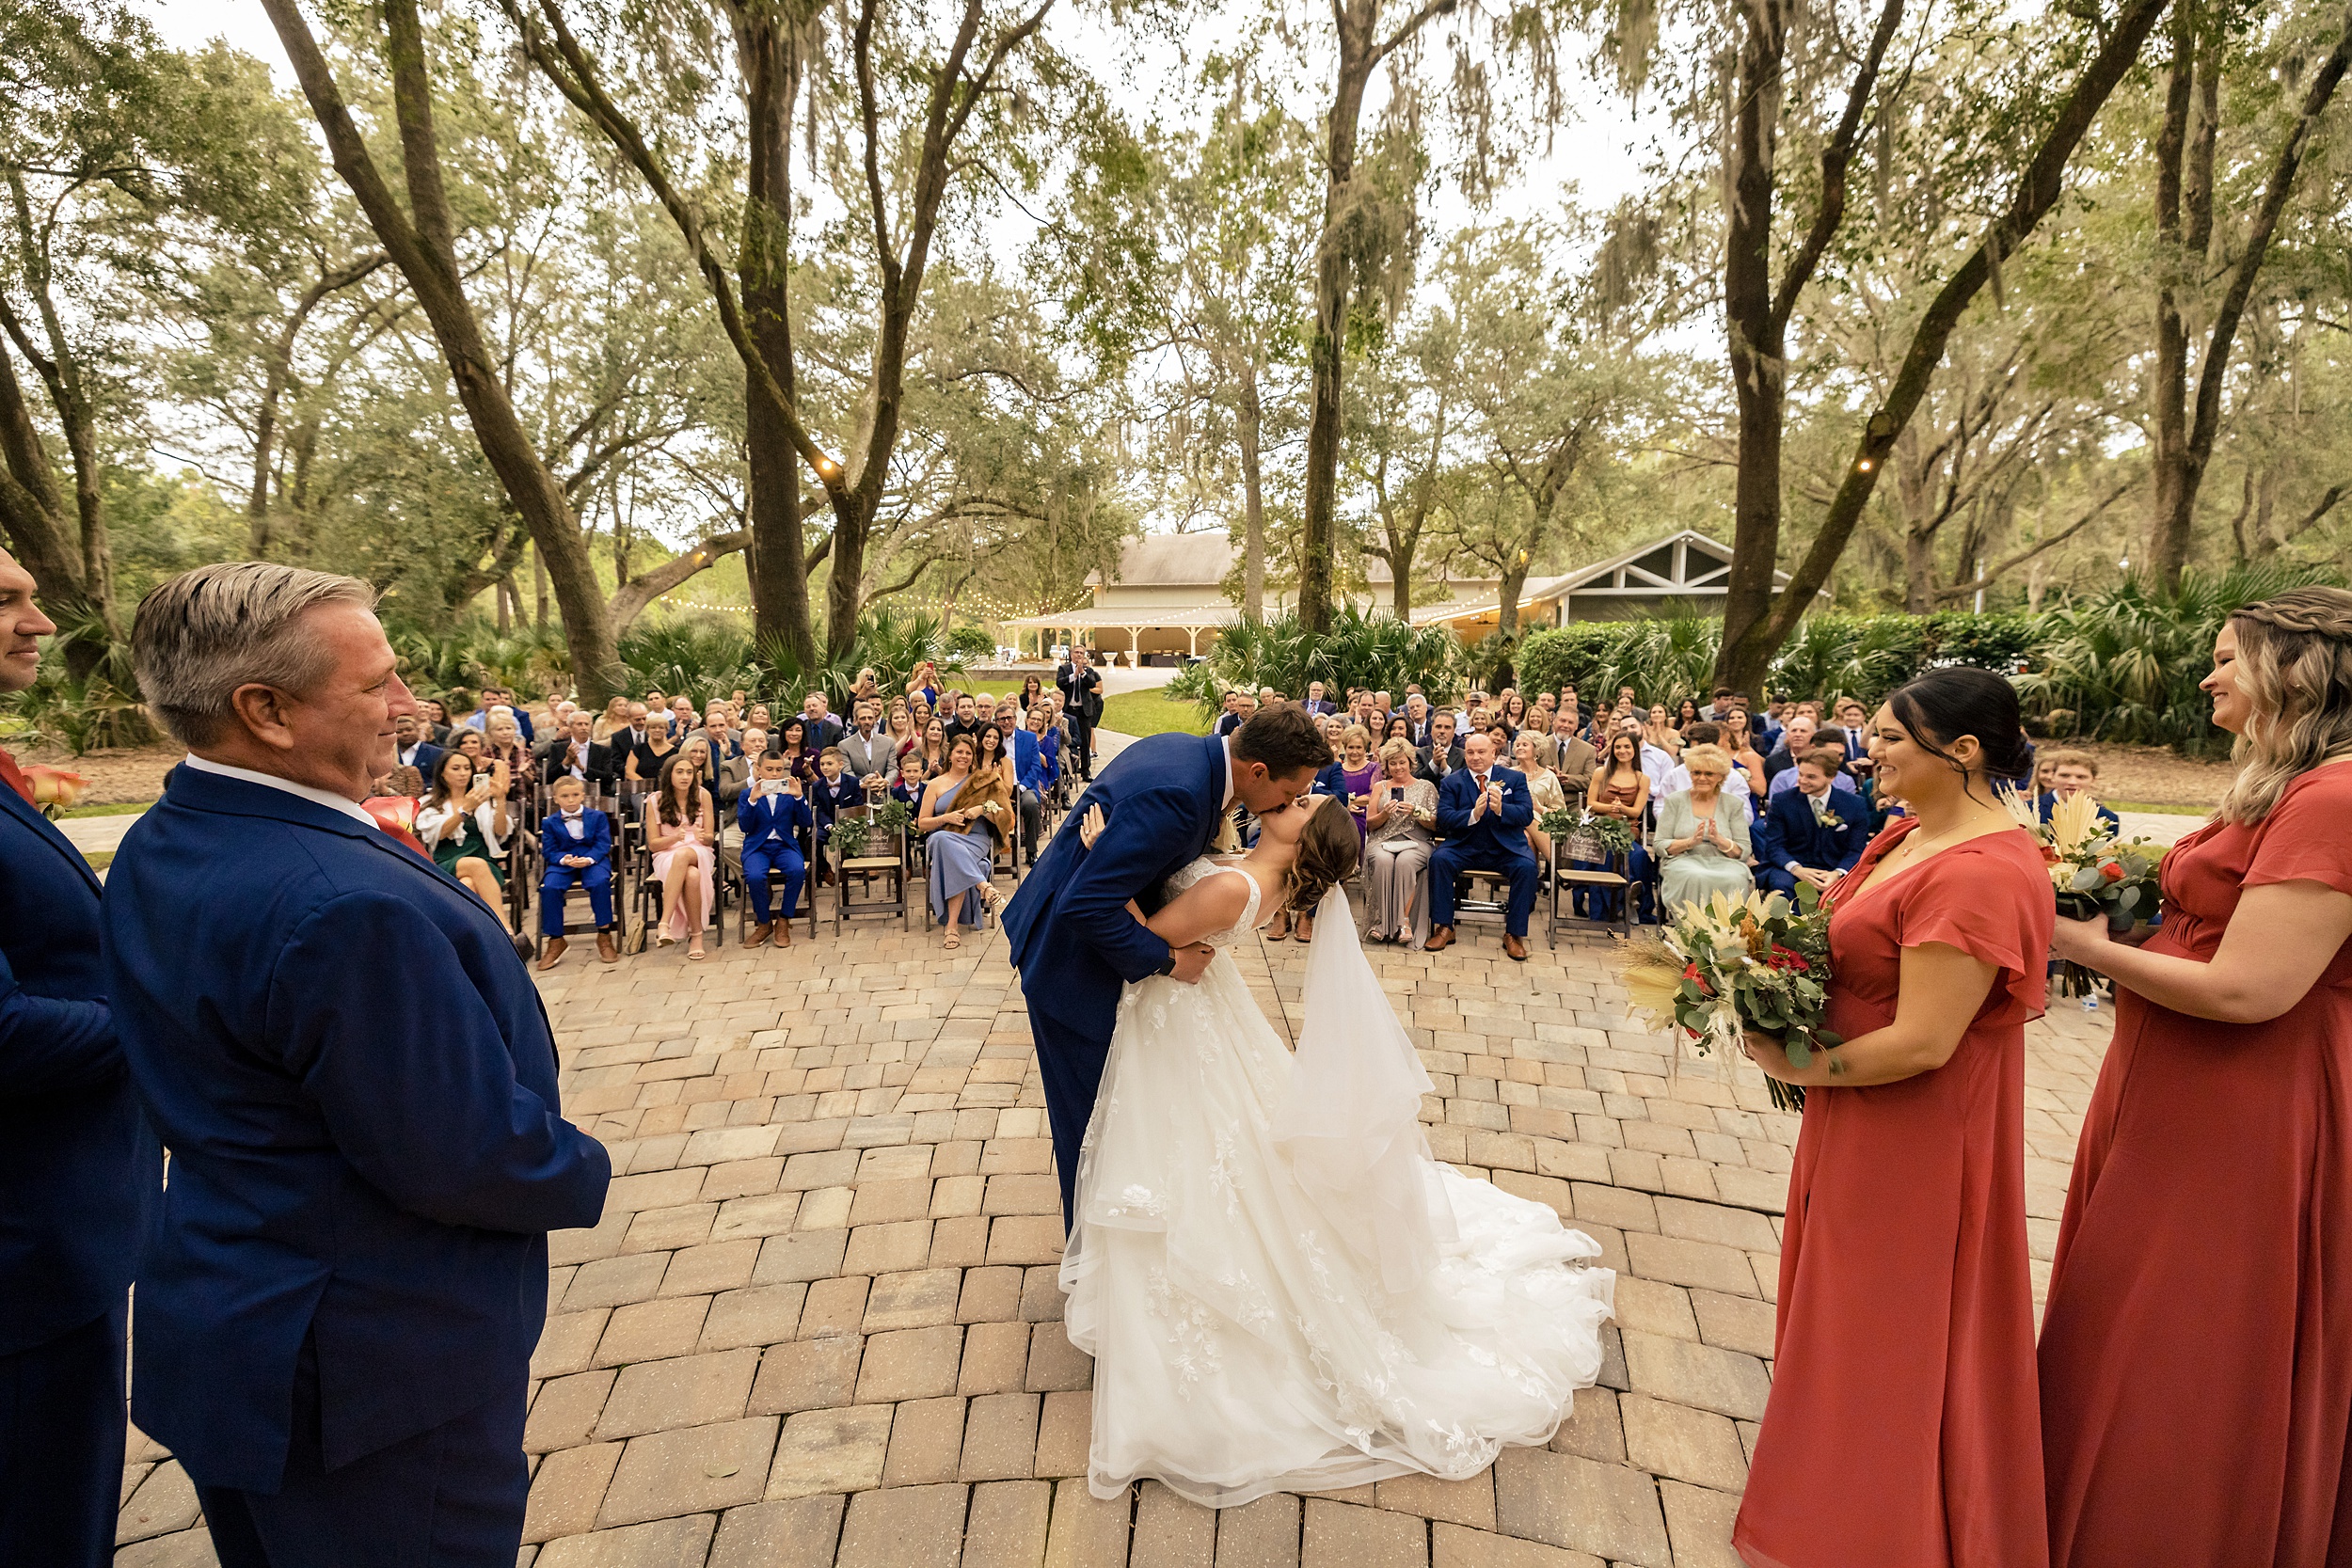 Newlyweds kiss at the end of their bowing oaks wedding ceremony to applause from the guests